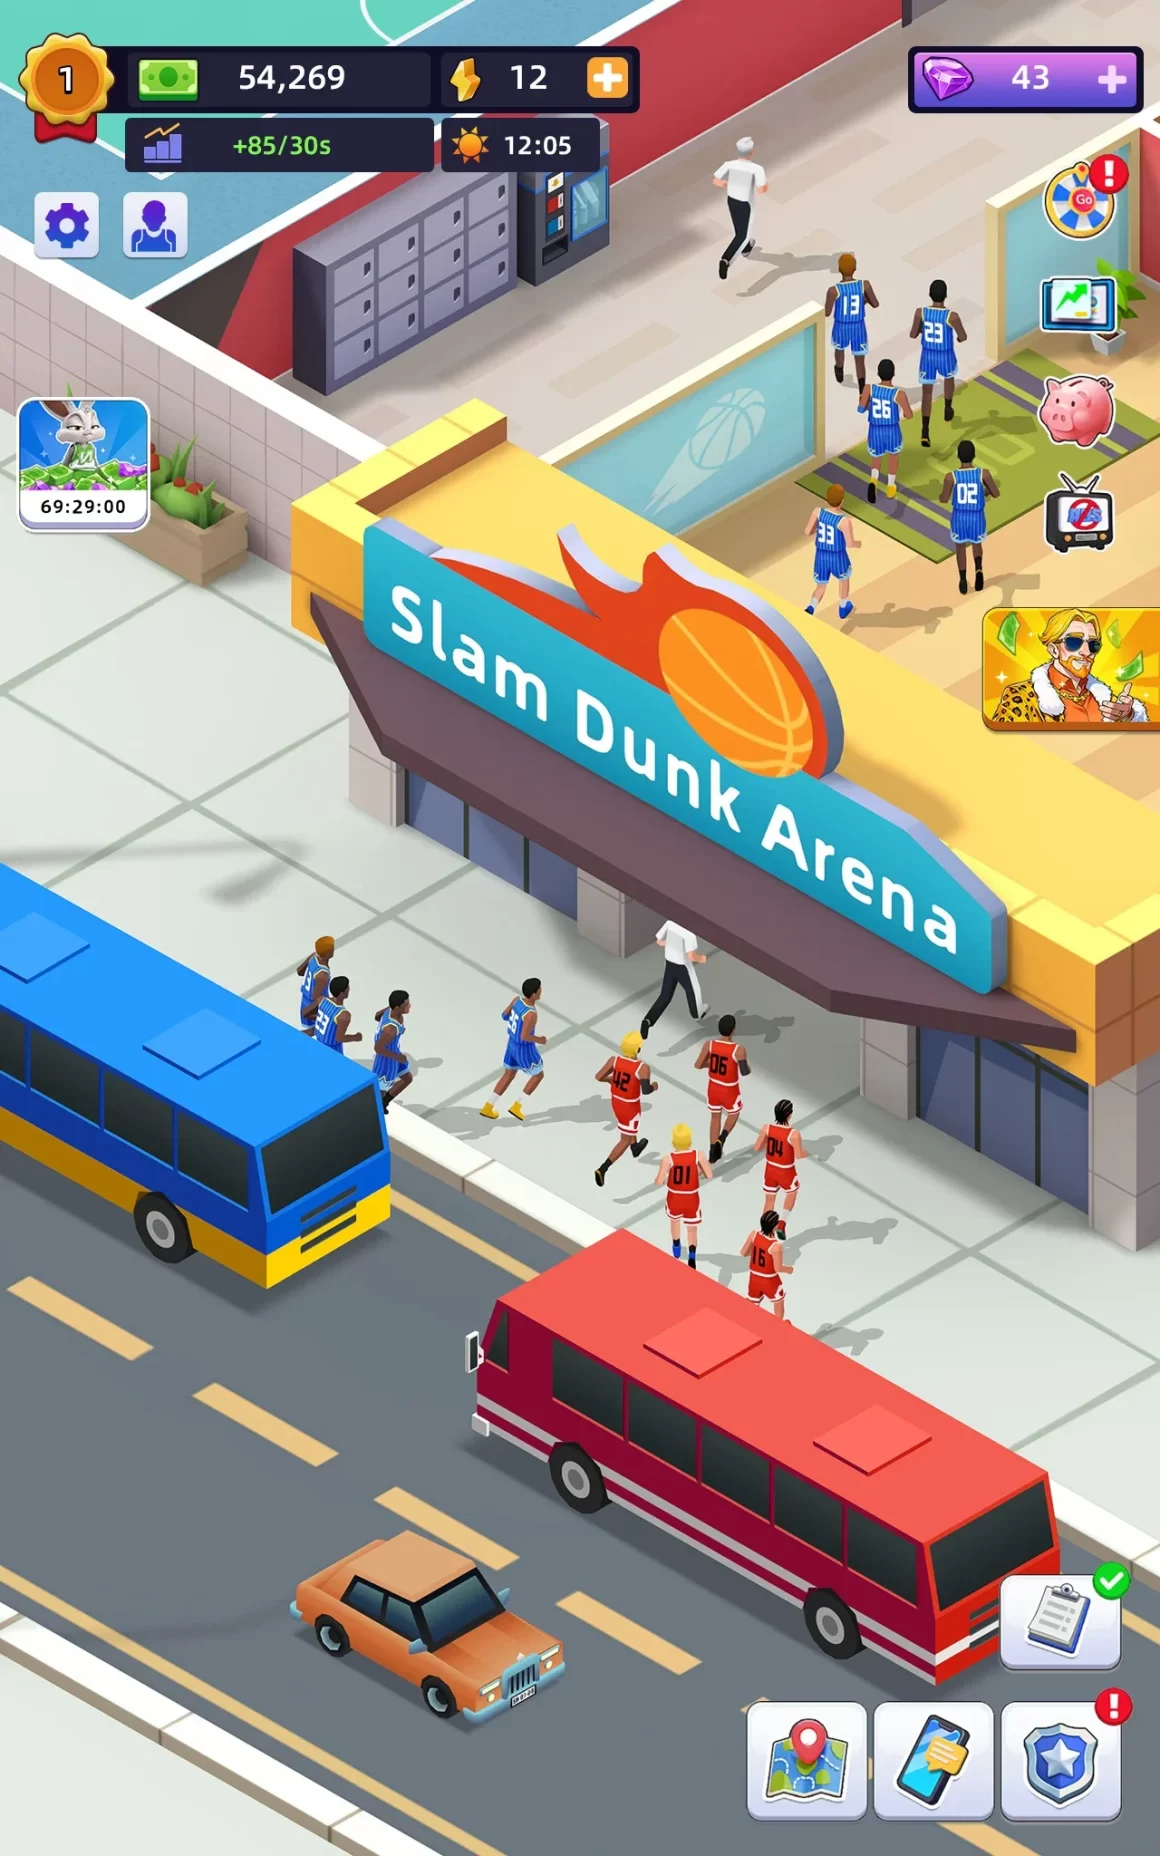 unnamed 24 3 1160x1856 - Idle Basketball Arena Tycoon Mod Apk V1.2.1 (Unlimited Money)